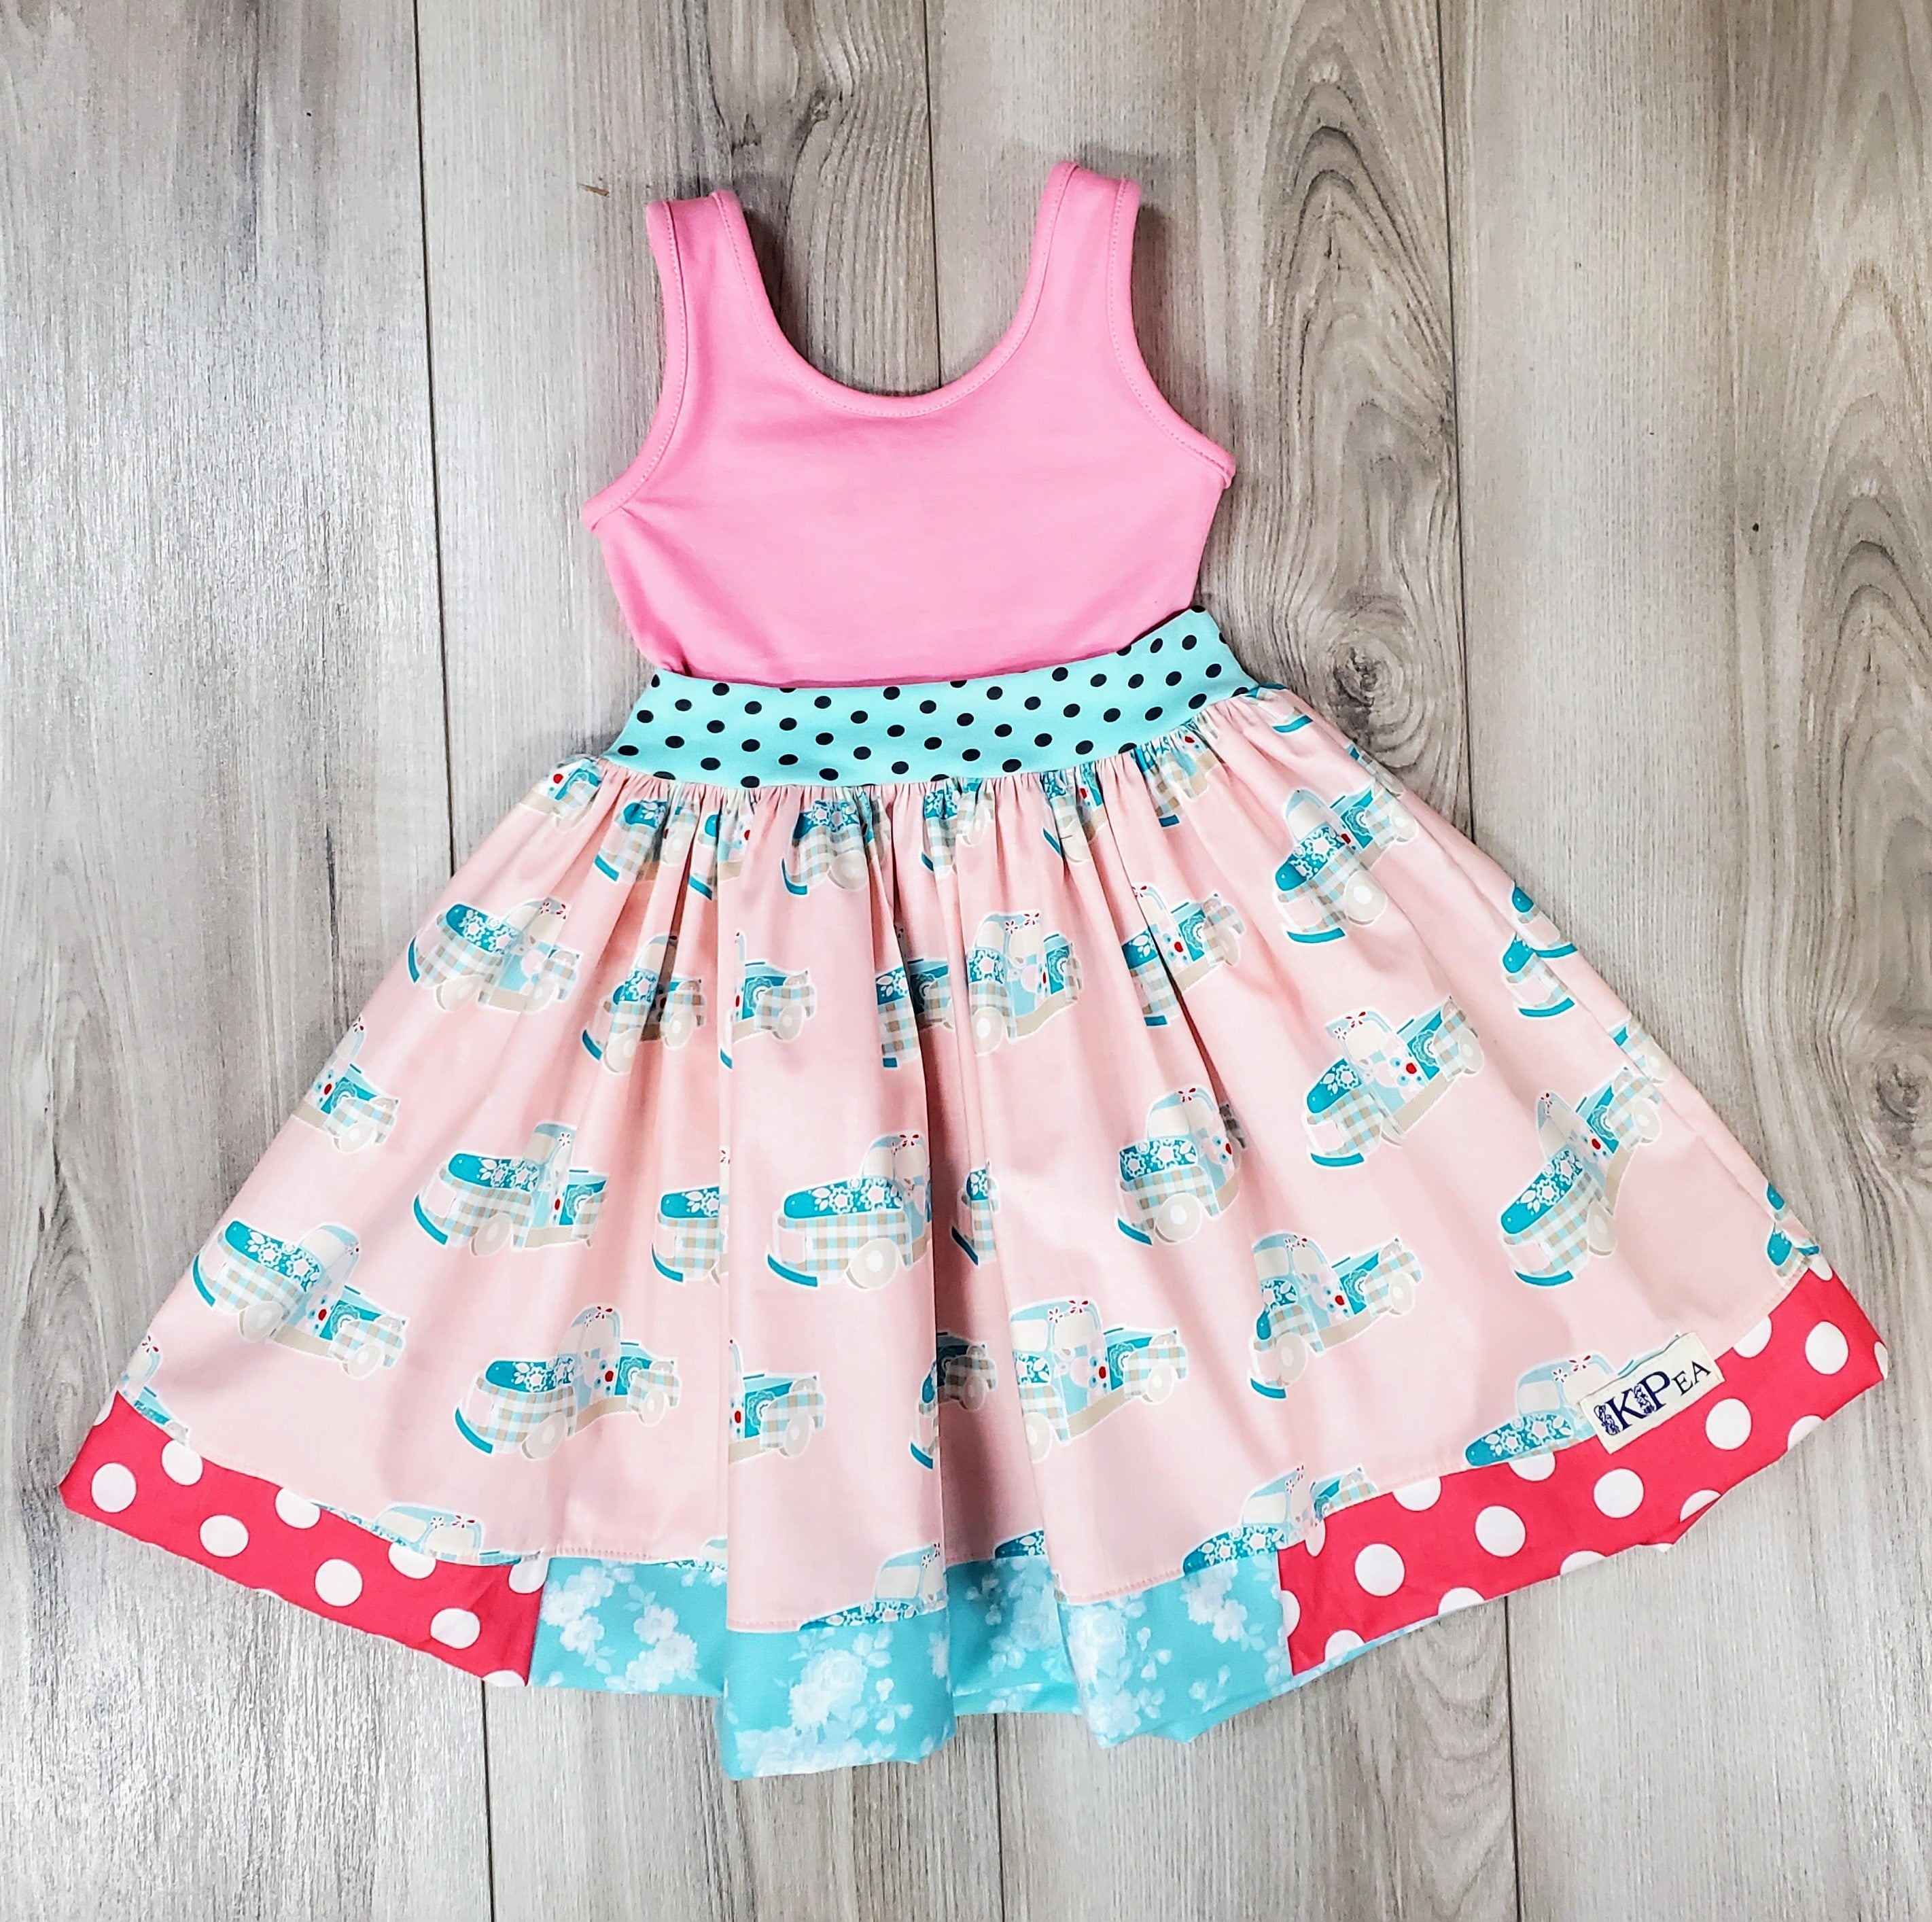 Down On The Farm Amy Dress (ships in 2 weeks)